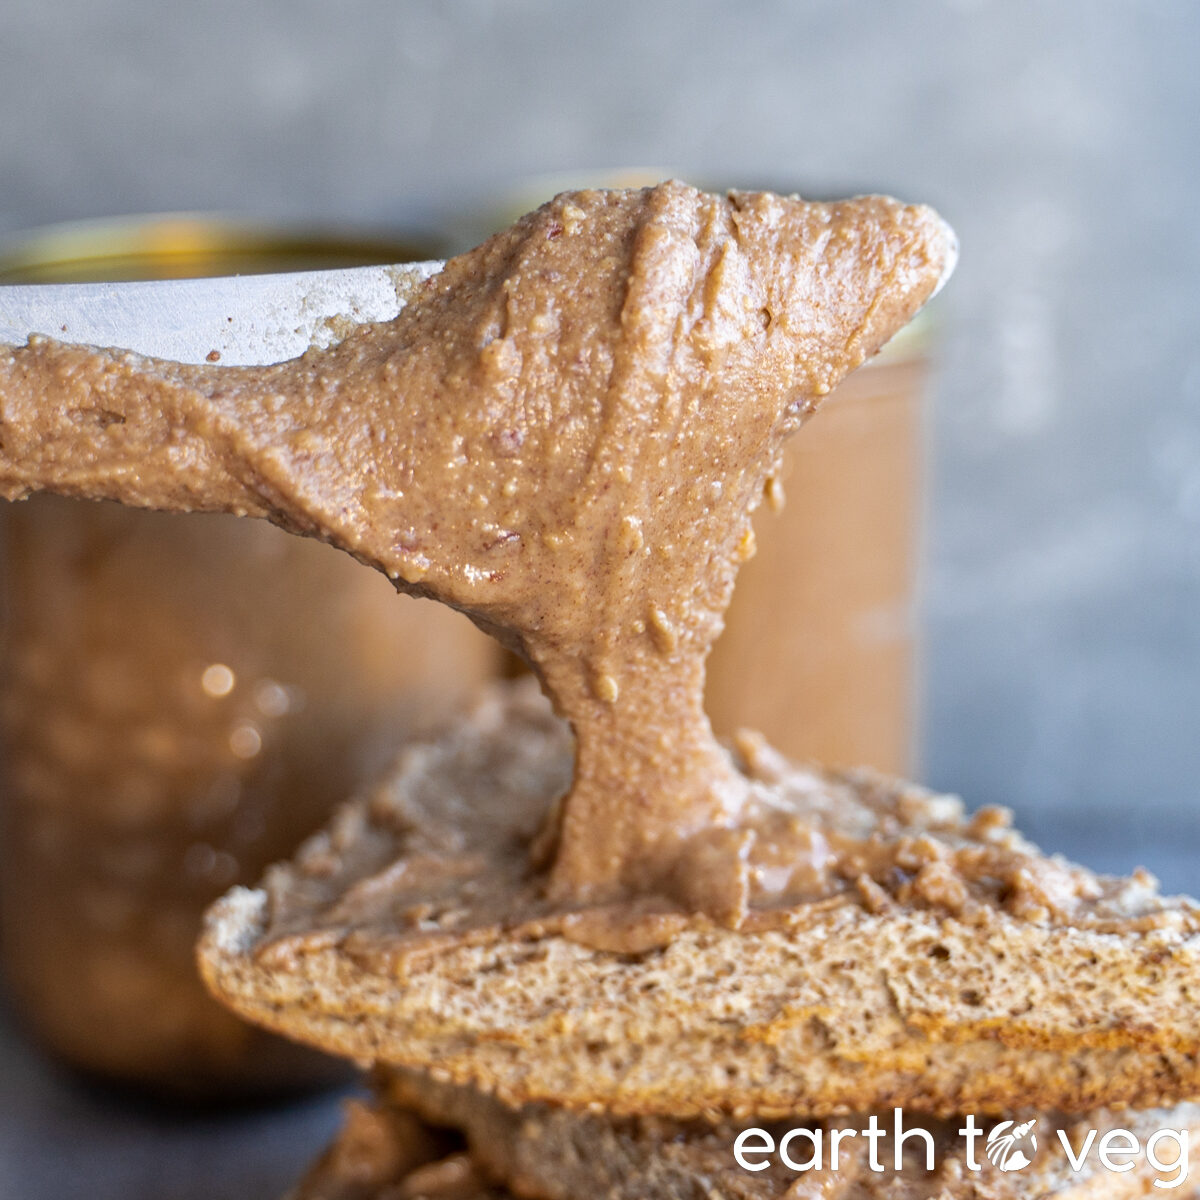 knife lifting up a generous dollop of homemade peanut butter